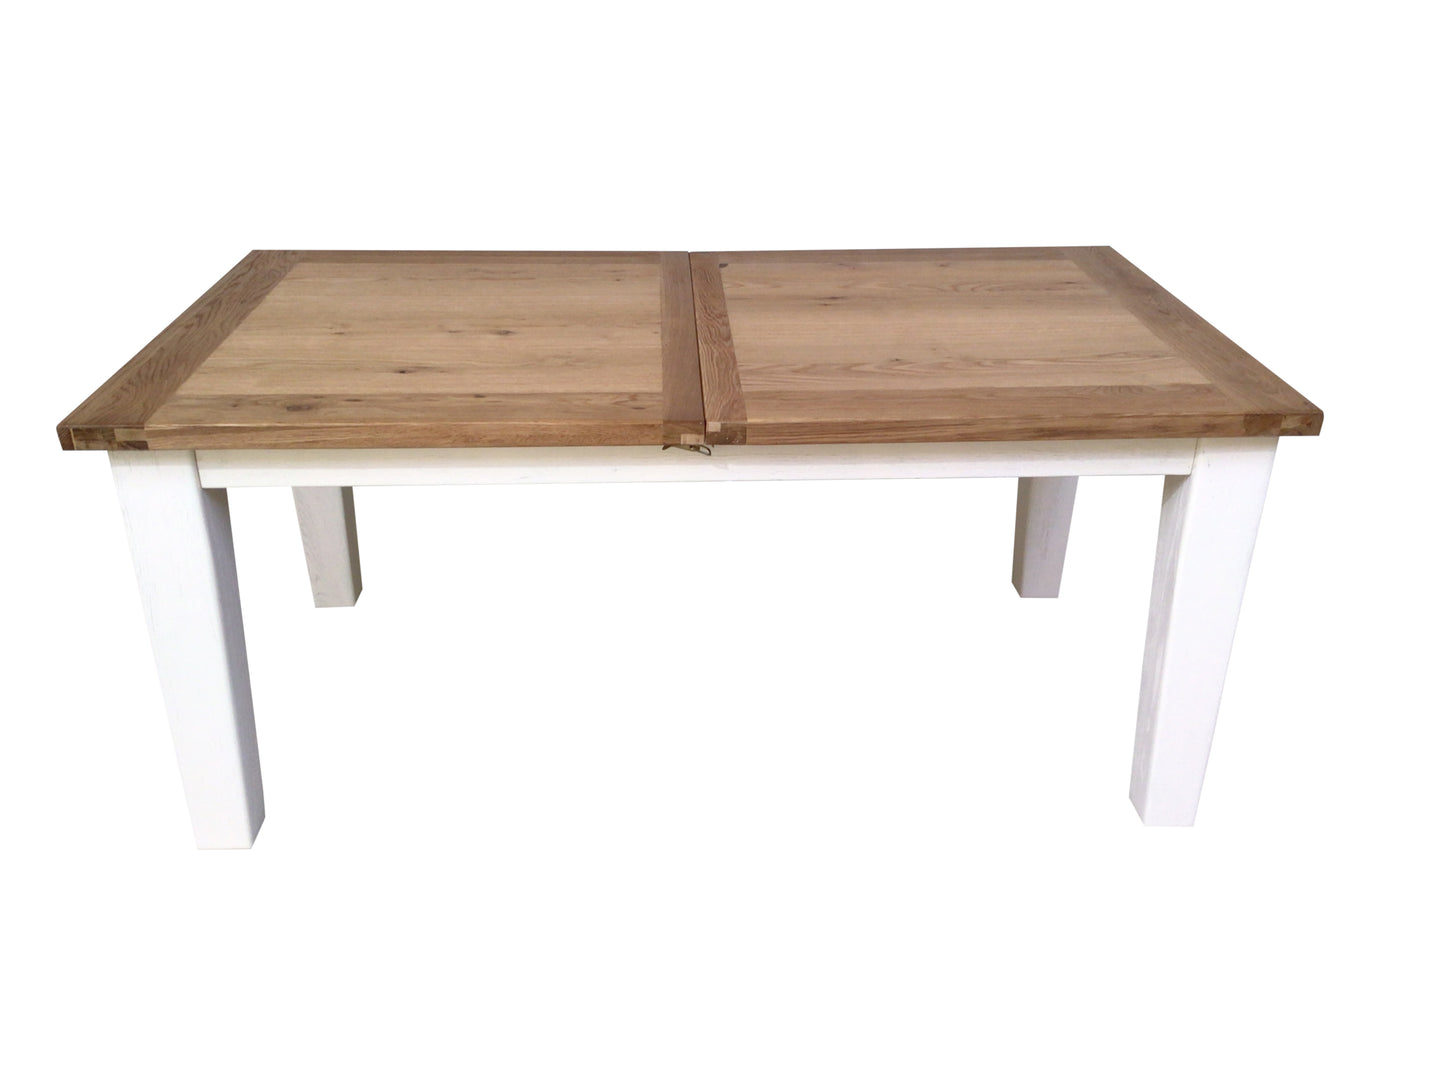 Calgary Oak 1.8m Ext Dining Table - Painted Off-White